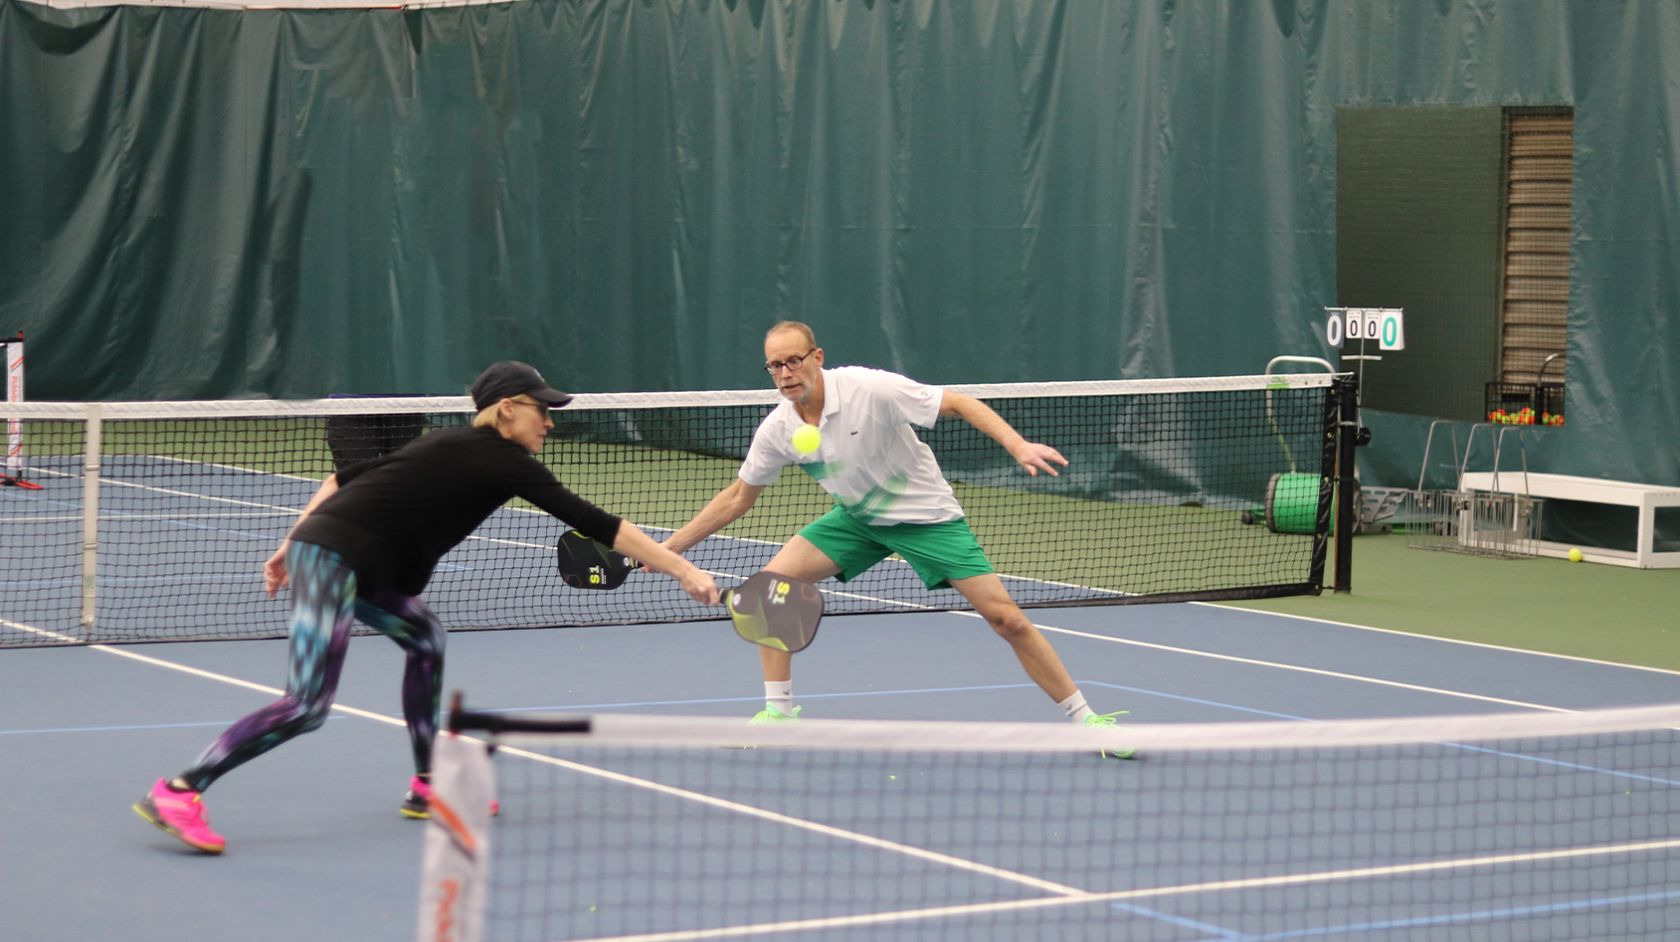 A Couple Of Men Playing Tennis